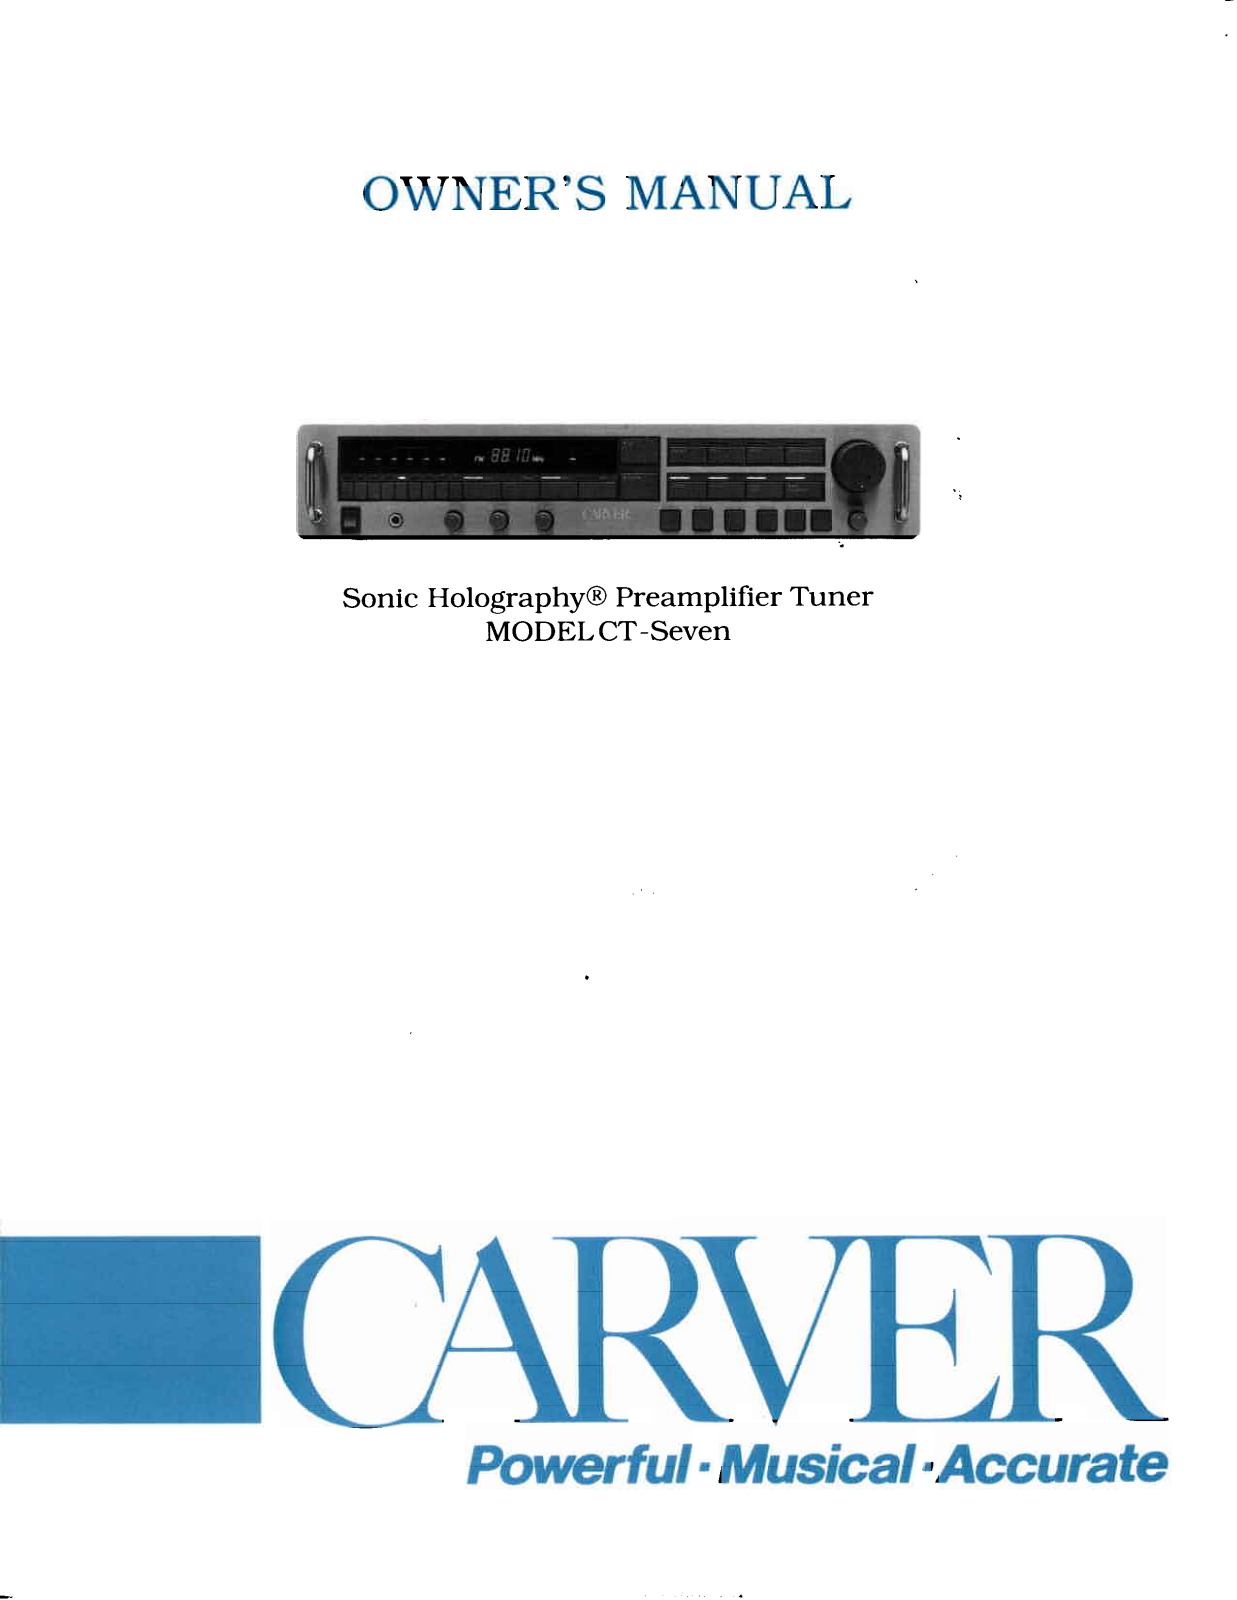 Carver CT-7 Owners manual